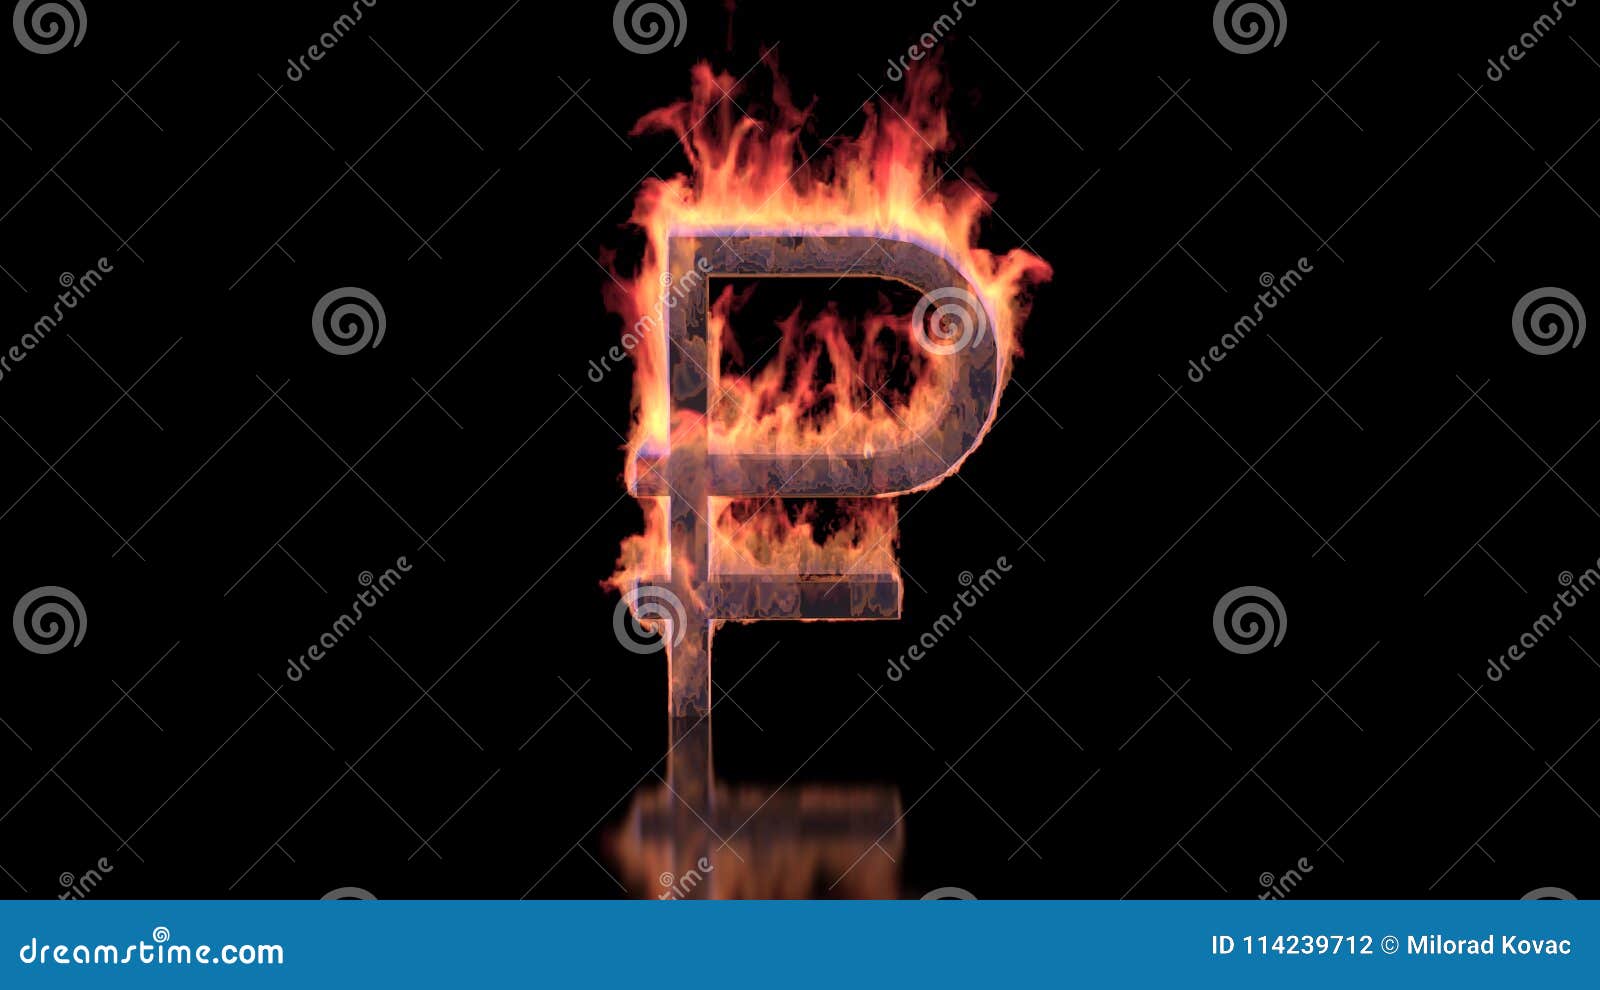 russian rubel sign burning in flames on the glossy surface